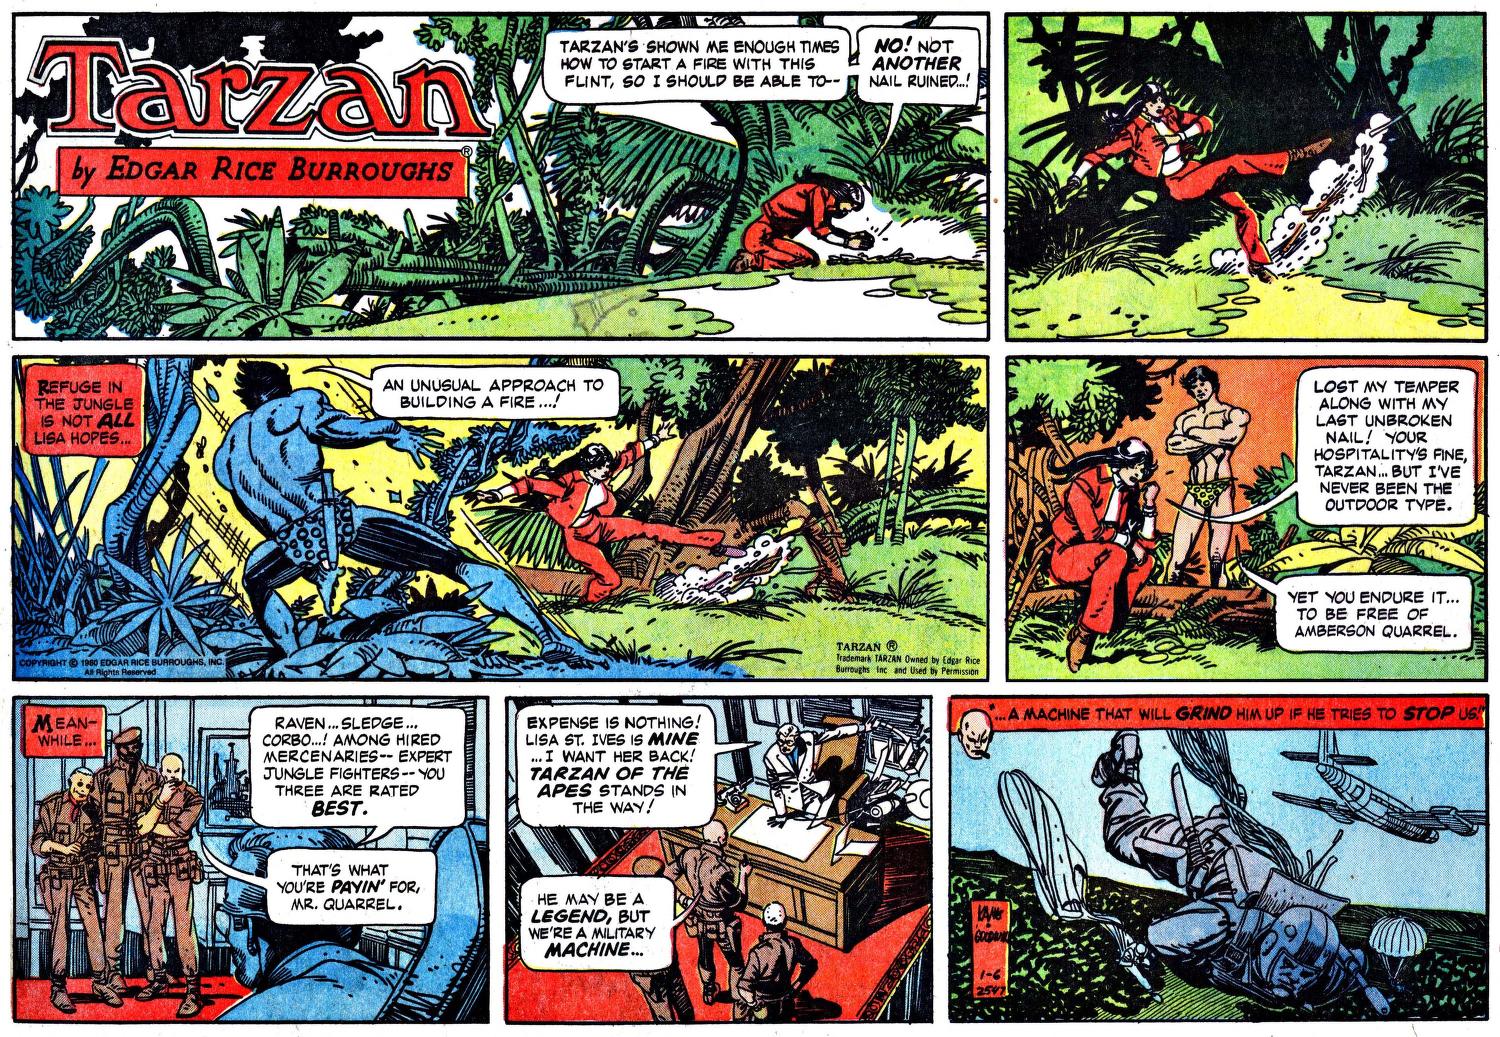 Old Comic Strips - Tarzan (1980 - 82, 84 - 85) : Free Download, Borrow, and  Streaming : Internet Archive